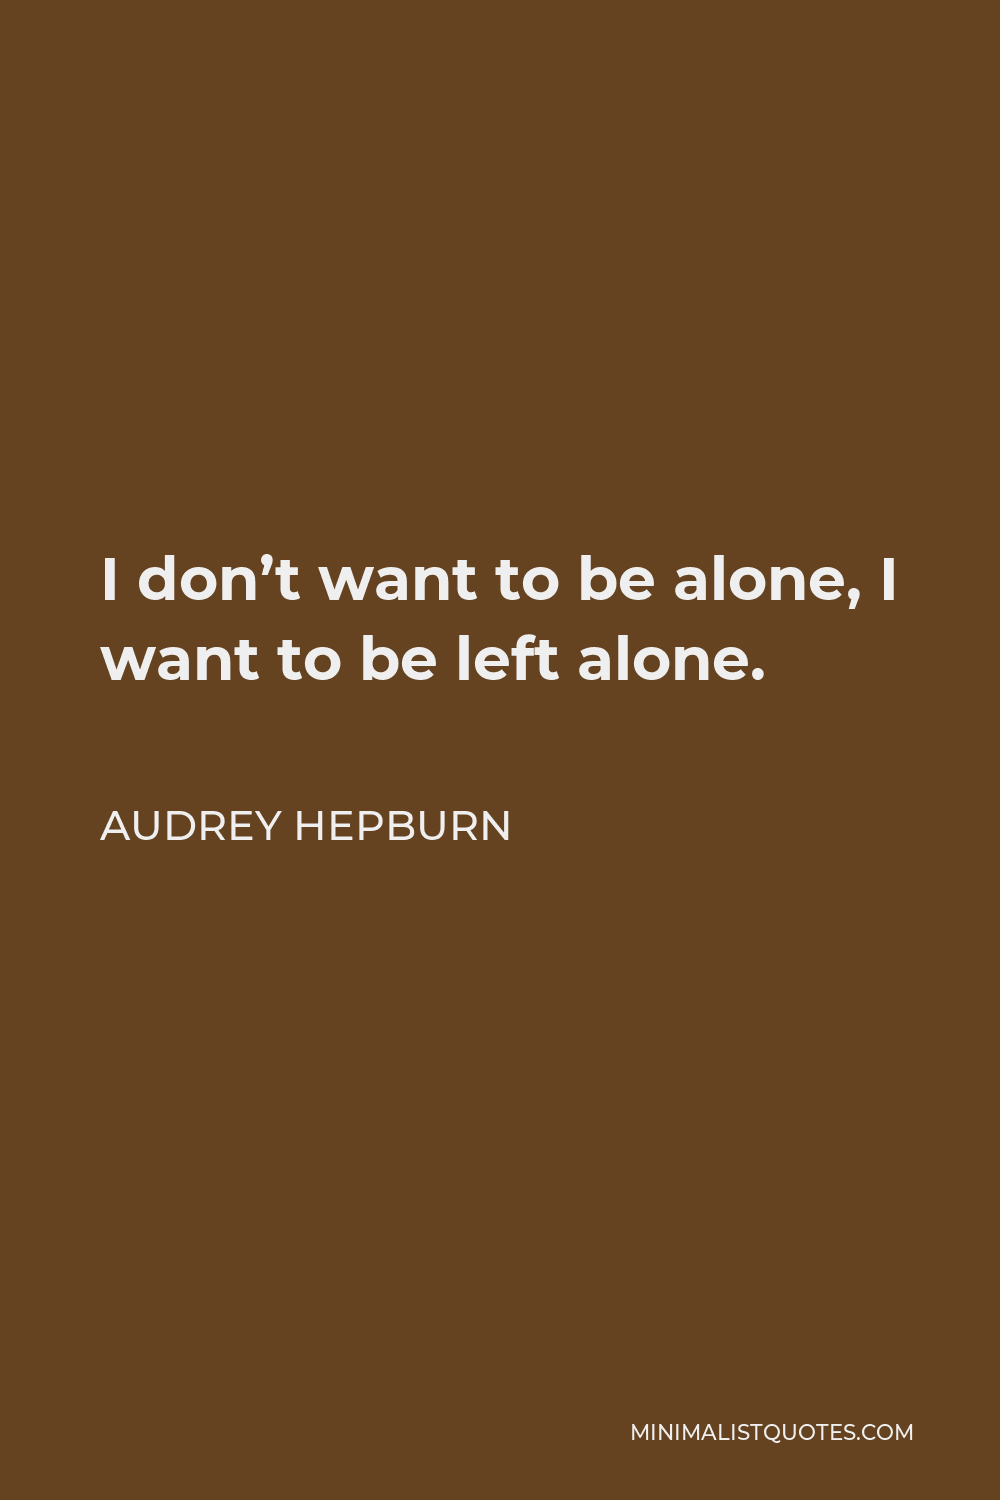 Audrey Hepburn Quote - I don’t want to be alone, I want to be left alone.